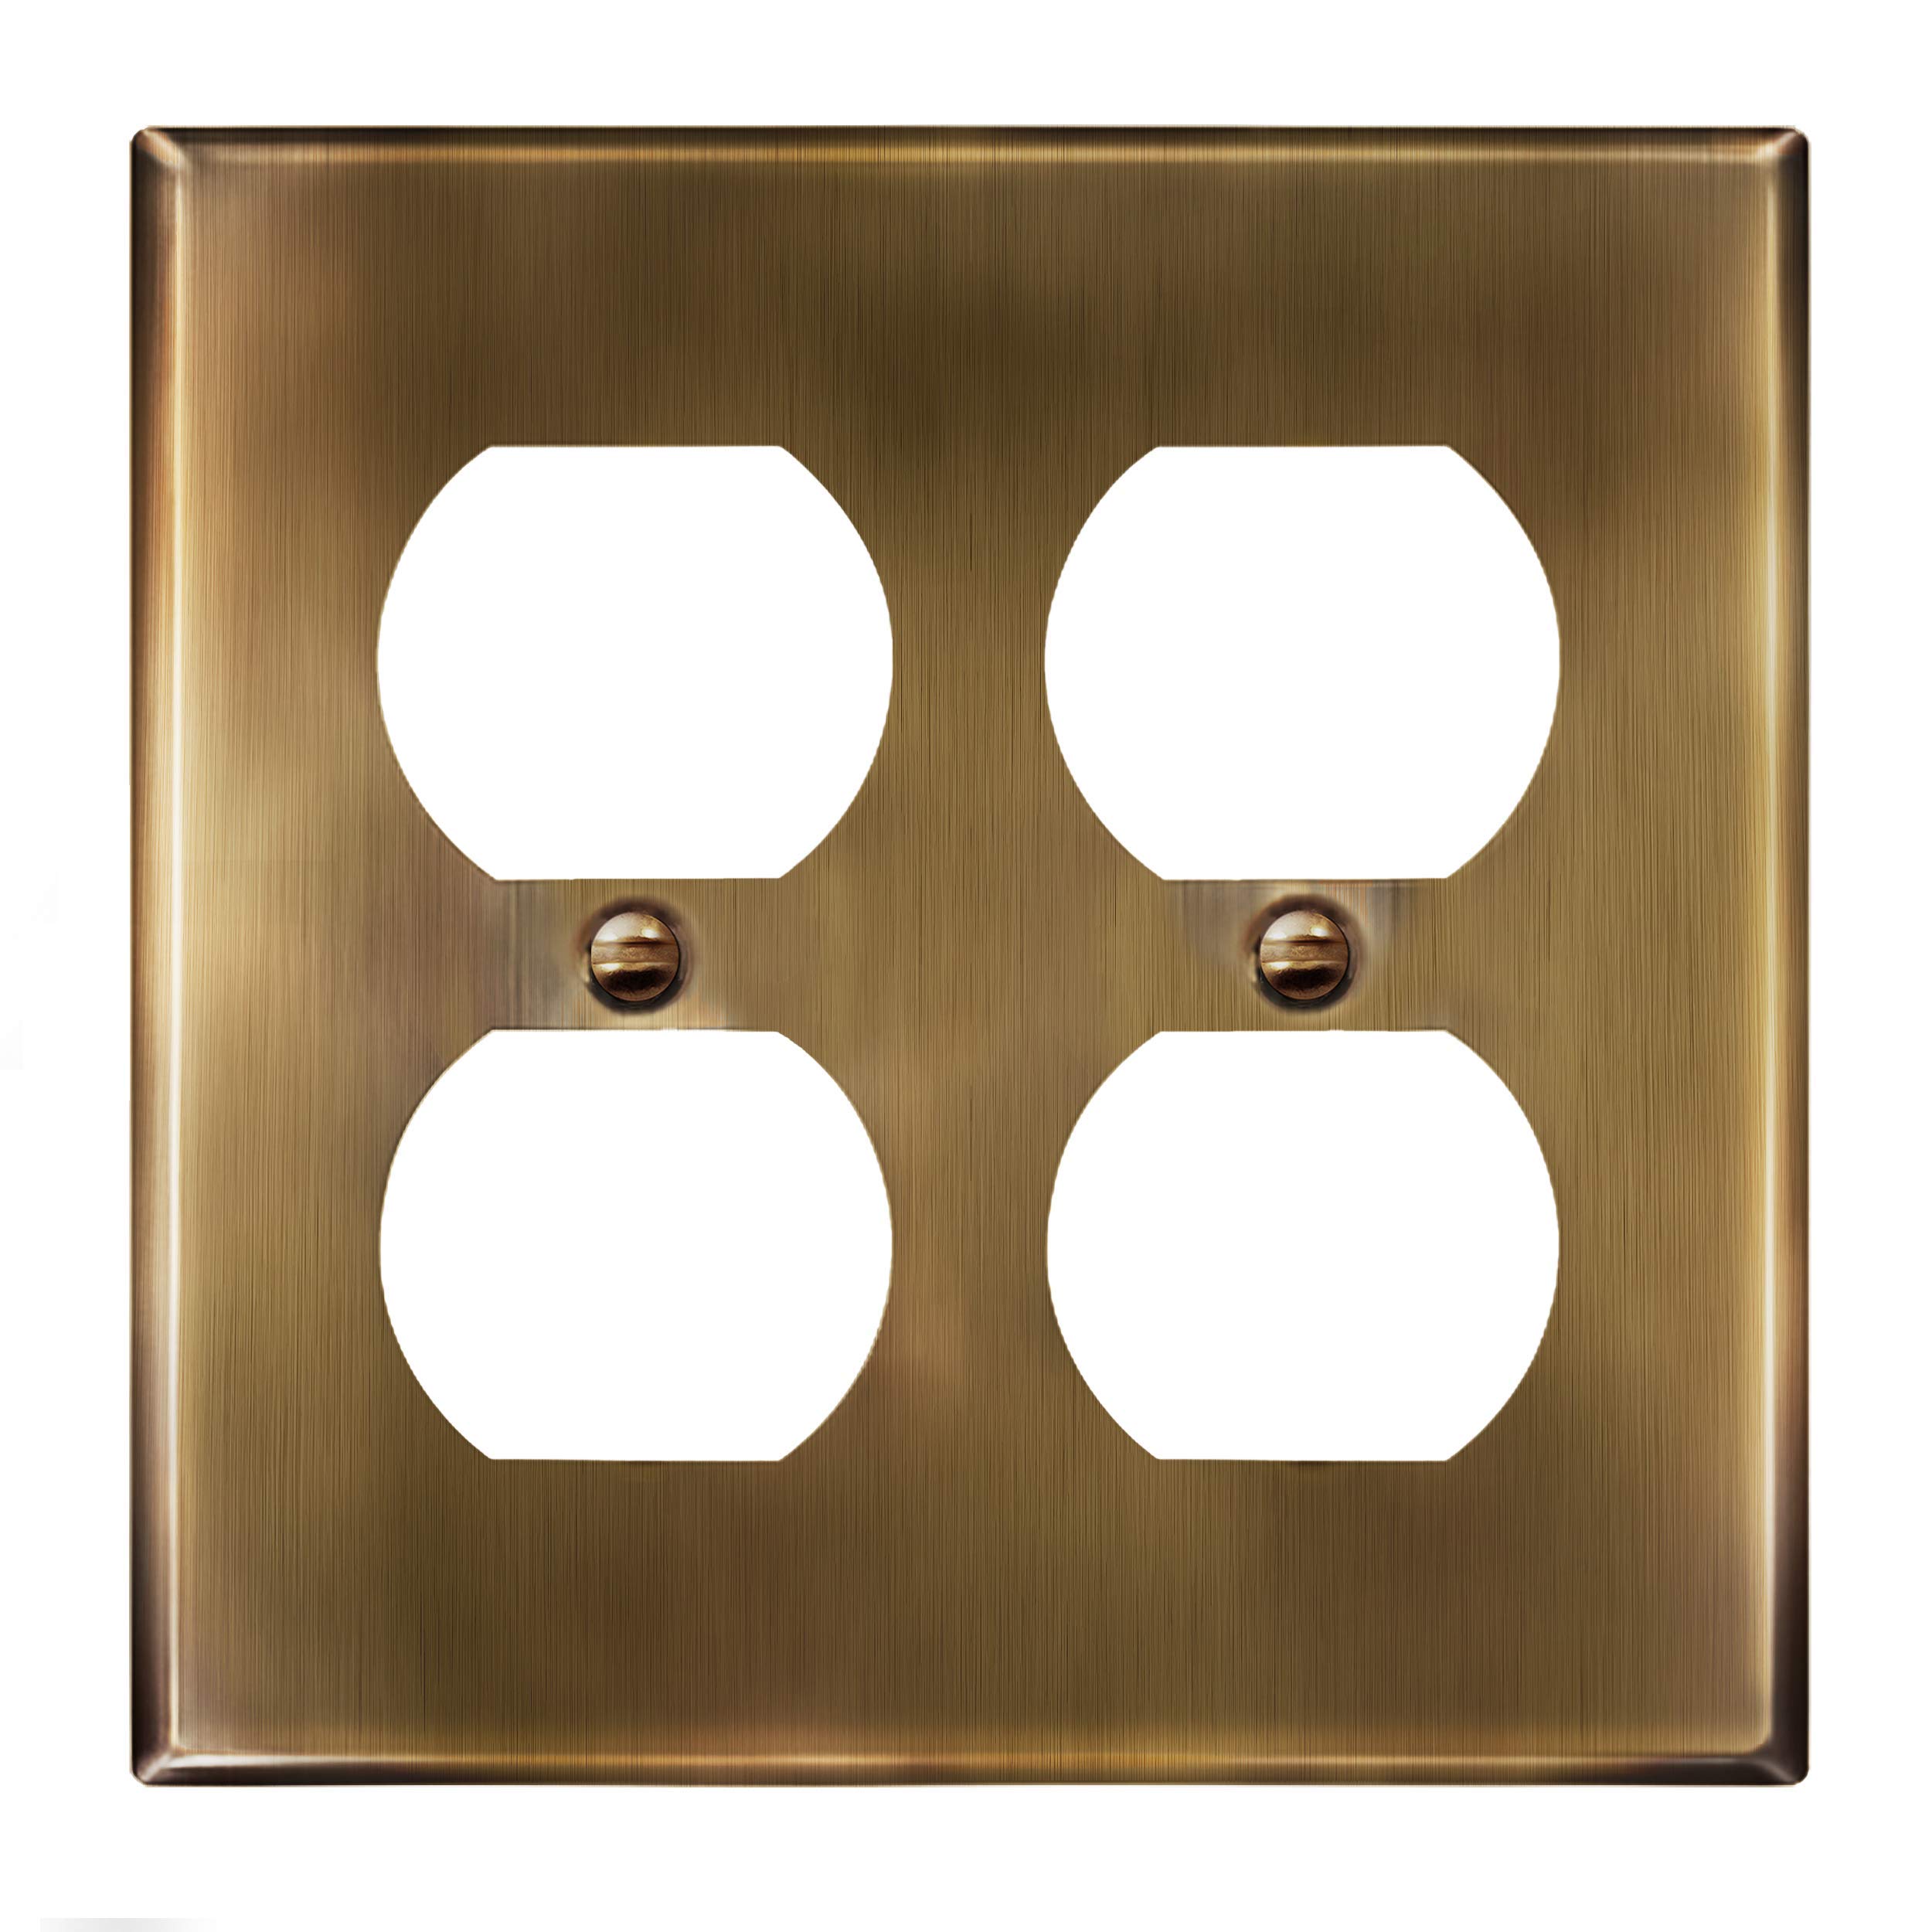 ENERLITES, Antique Brass Double Duplex Receptacle Metal Wall Plate, Outlet Cover, Corrosion Resistant, Standard Size 2-Gang 4.50